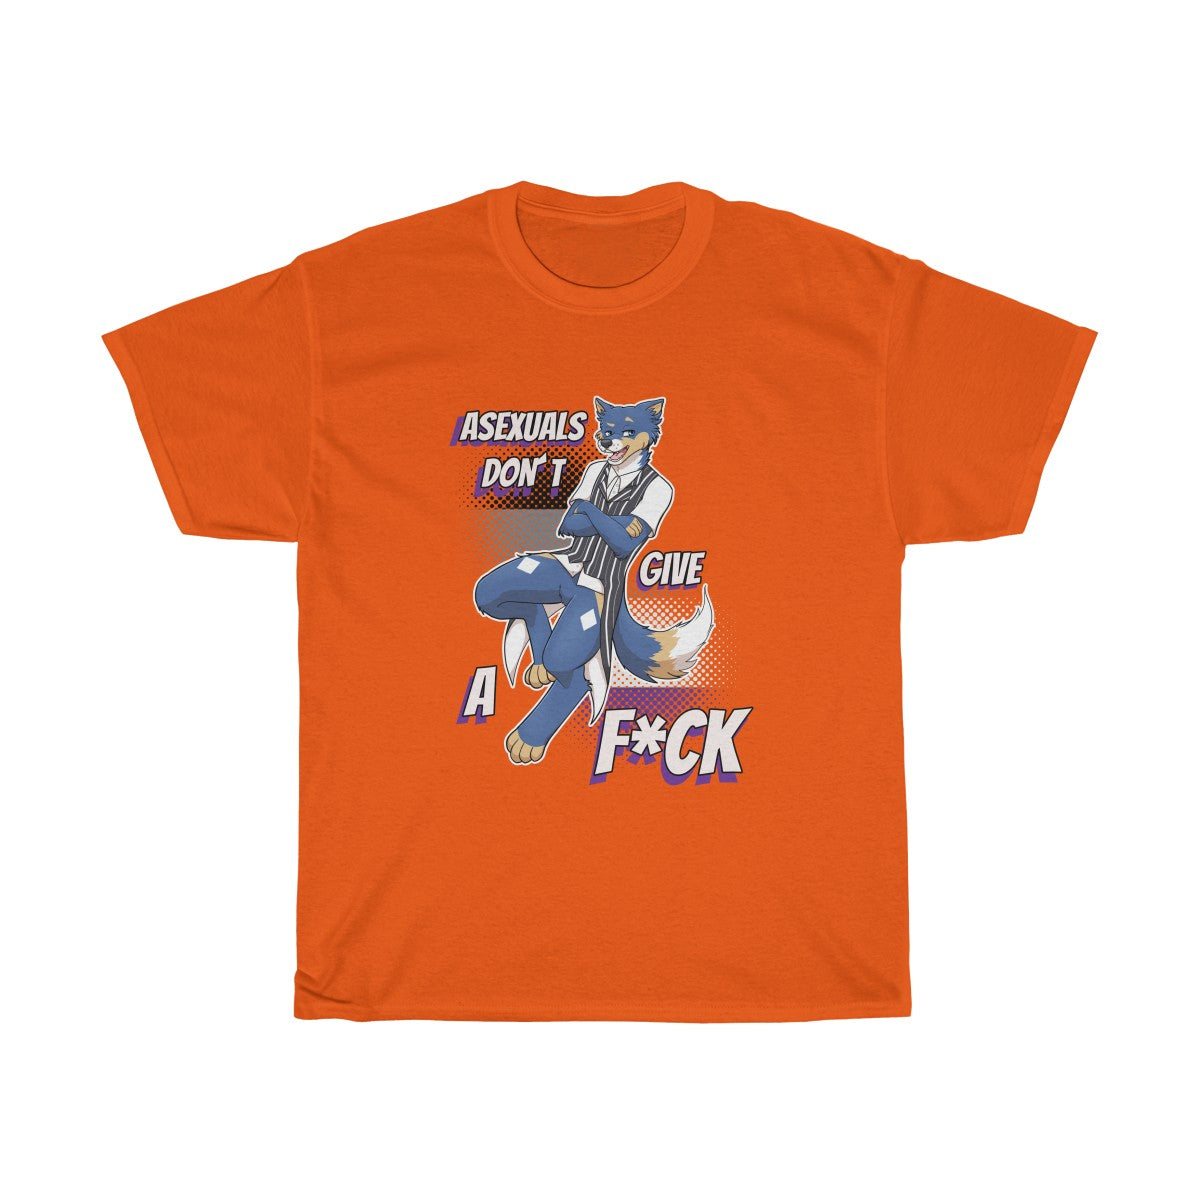 Asexual Don't Give A F*ck - T-Shirt T-Shirt Artemis Wishfoot Orange S 